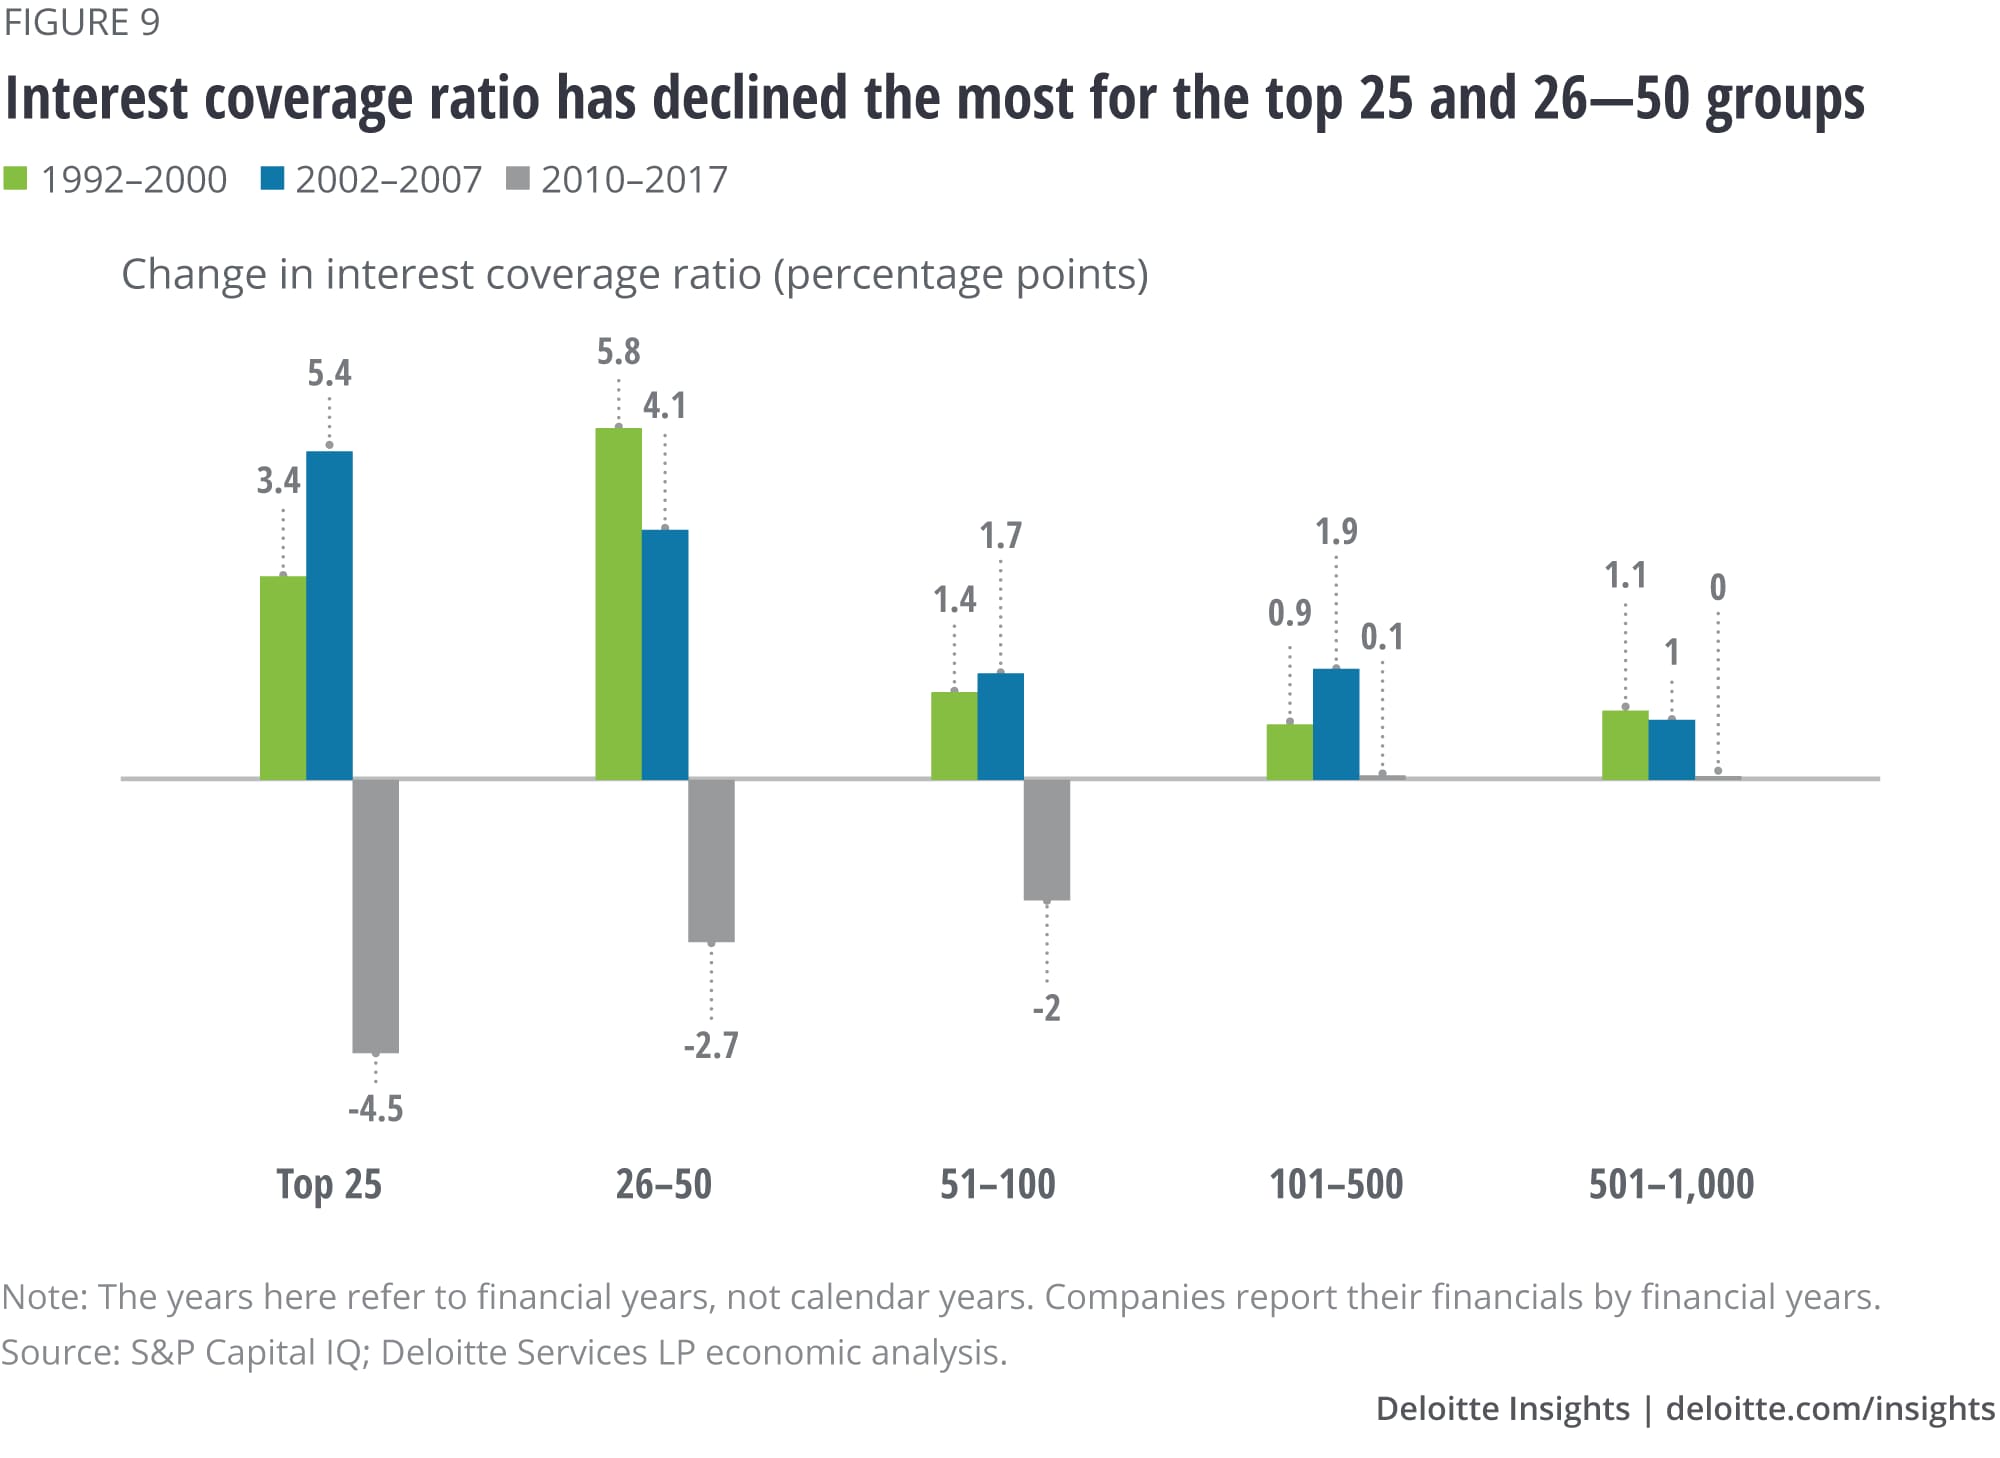 Interest coverage ratio has declined the most for the top 25 and 26-50 groups